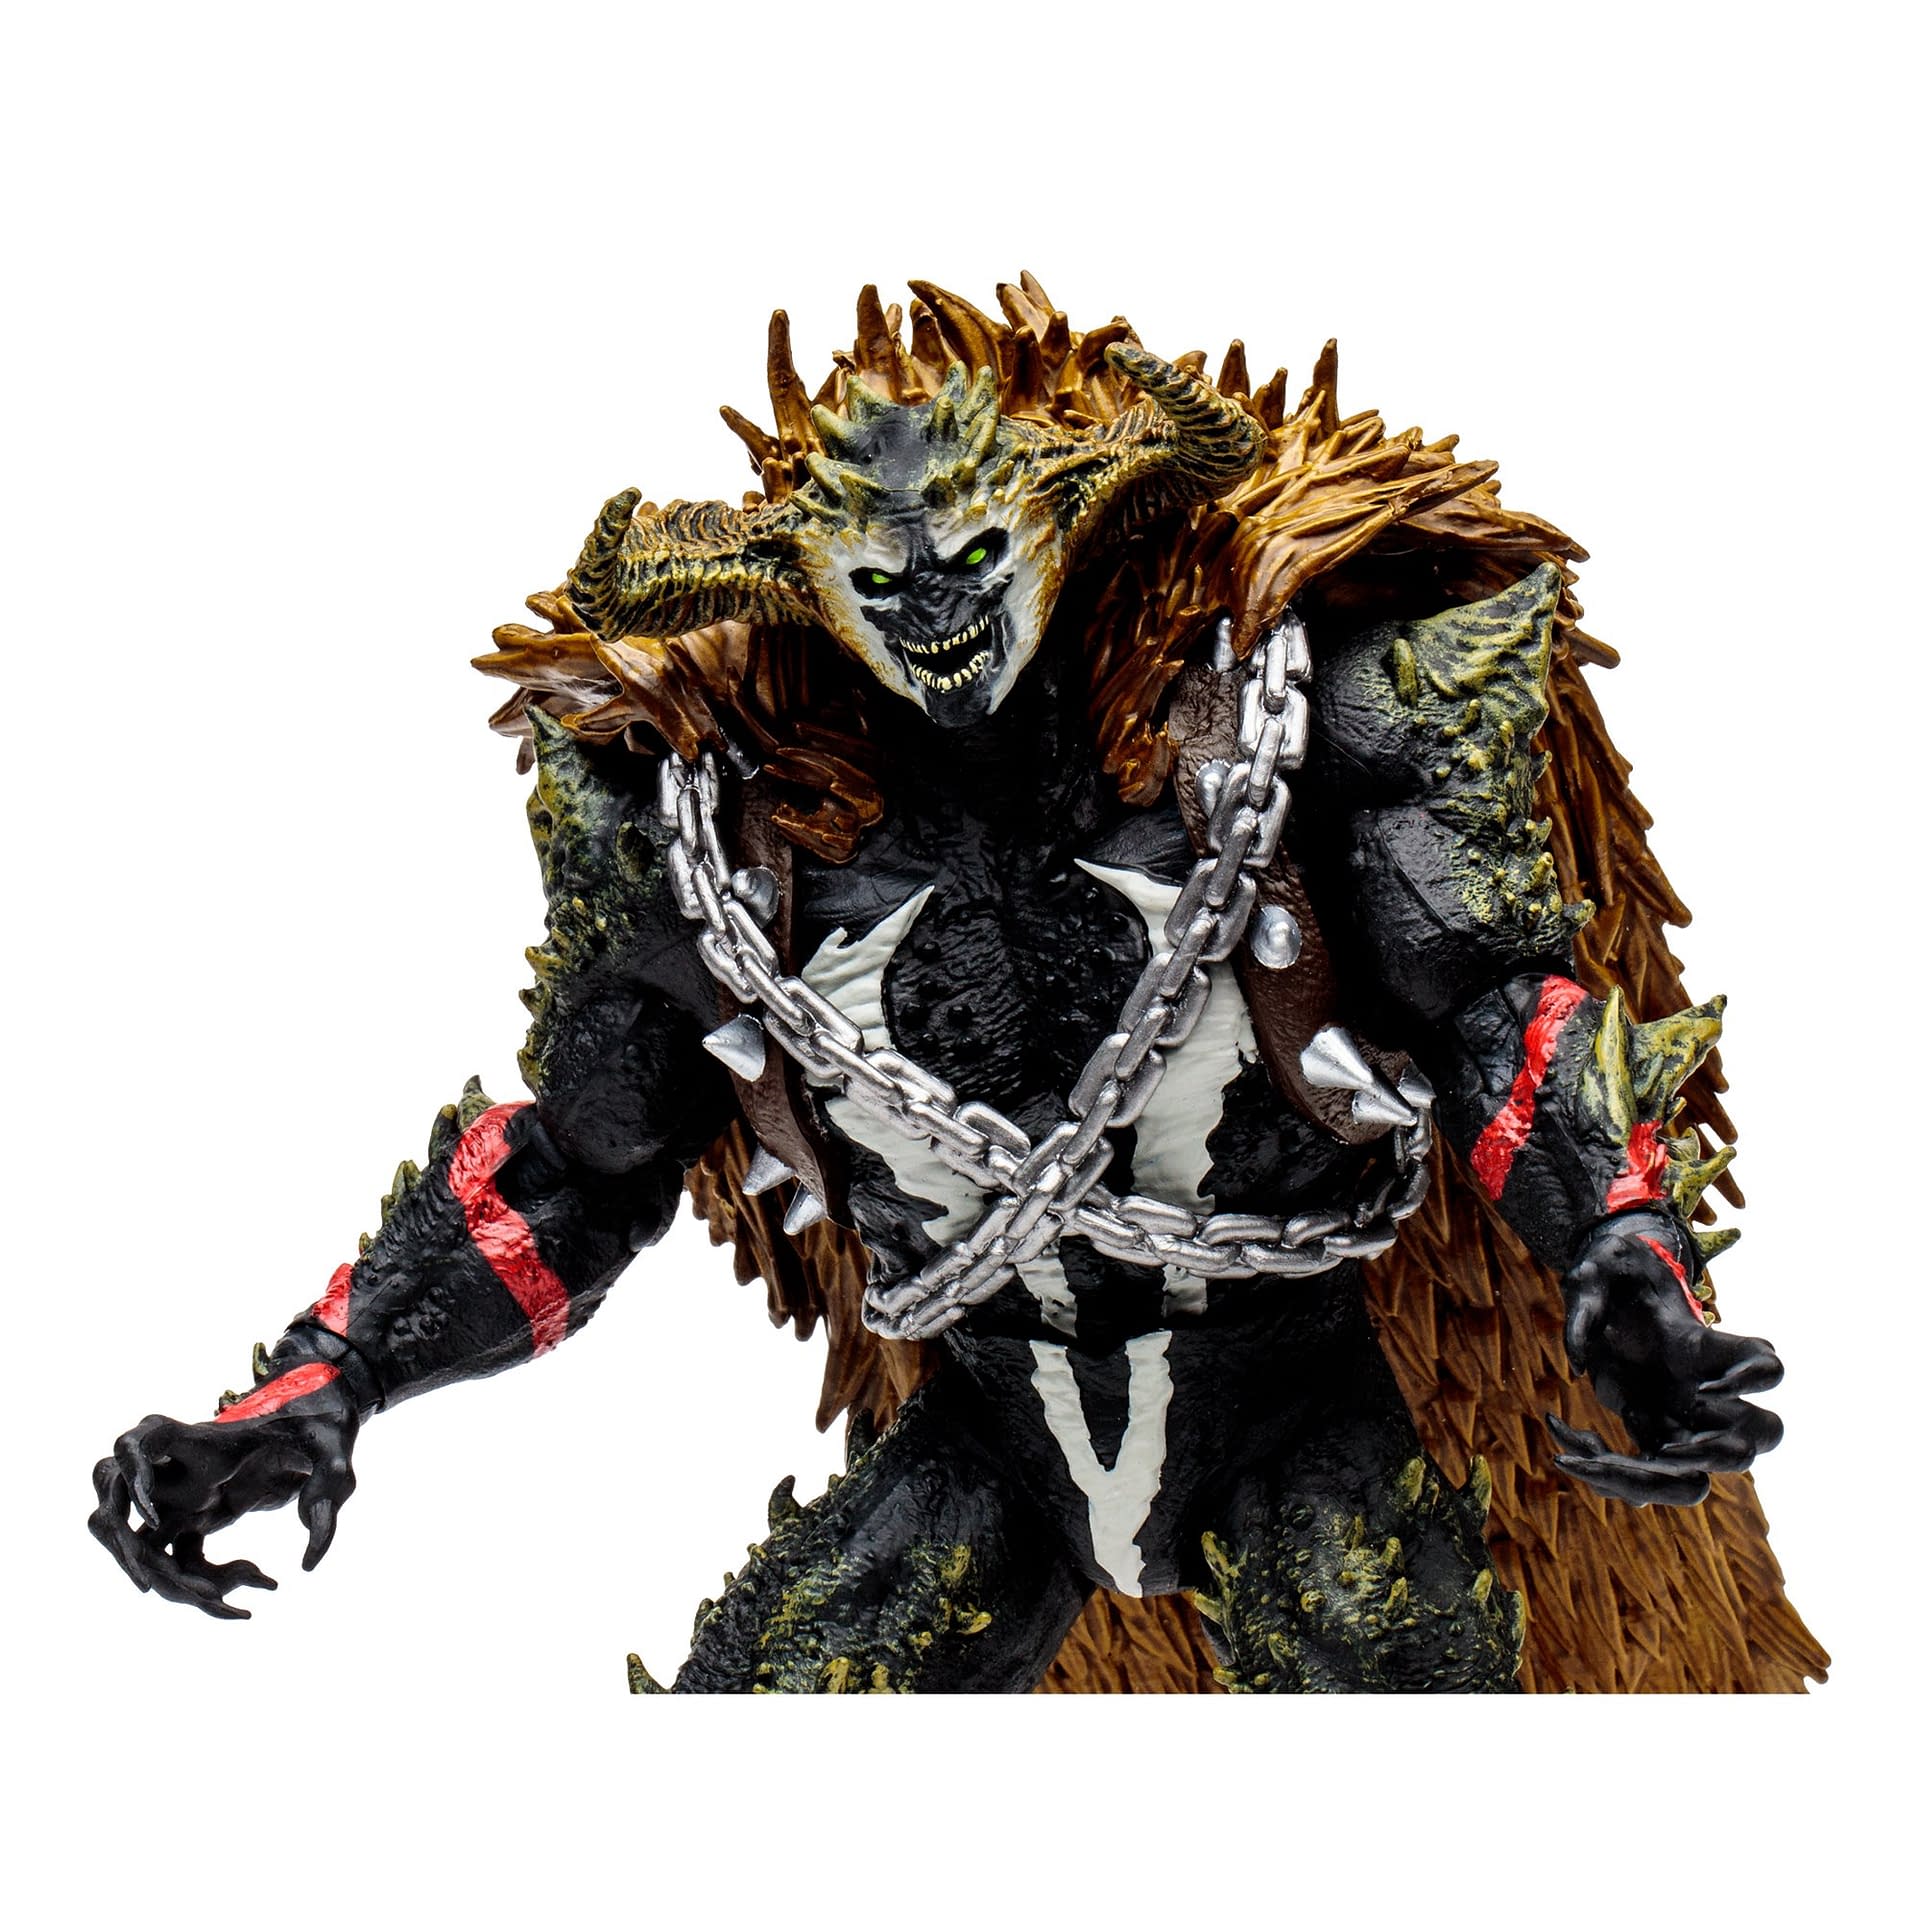 McFarlane Toys Pulls Omega Spawn Through Time with New MegaFig